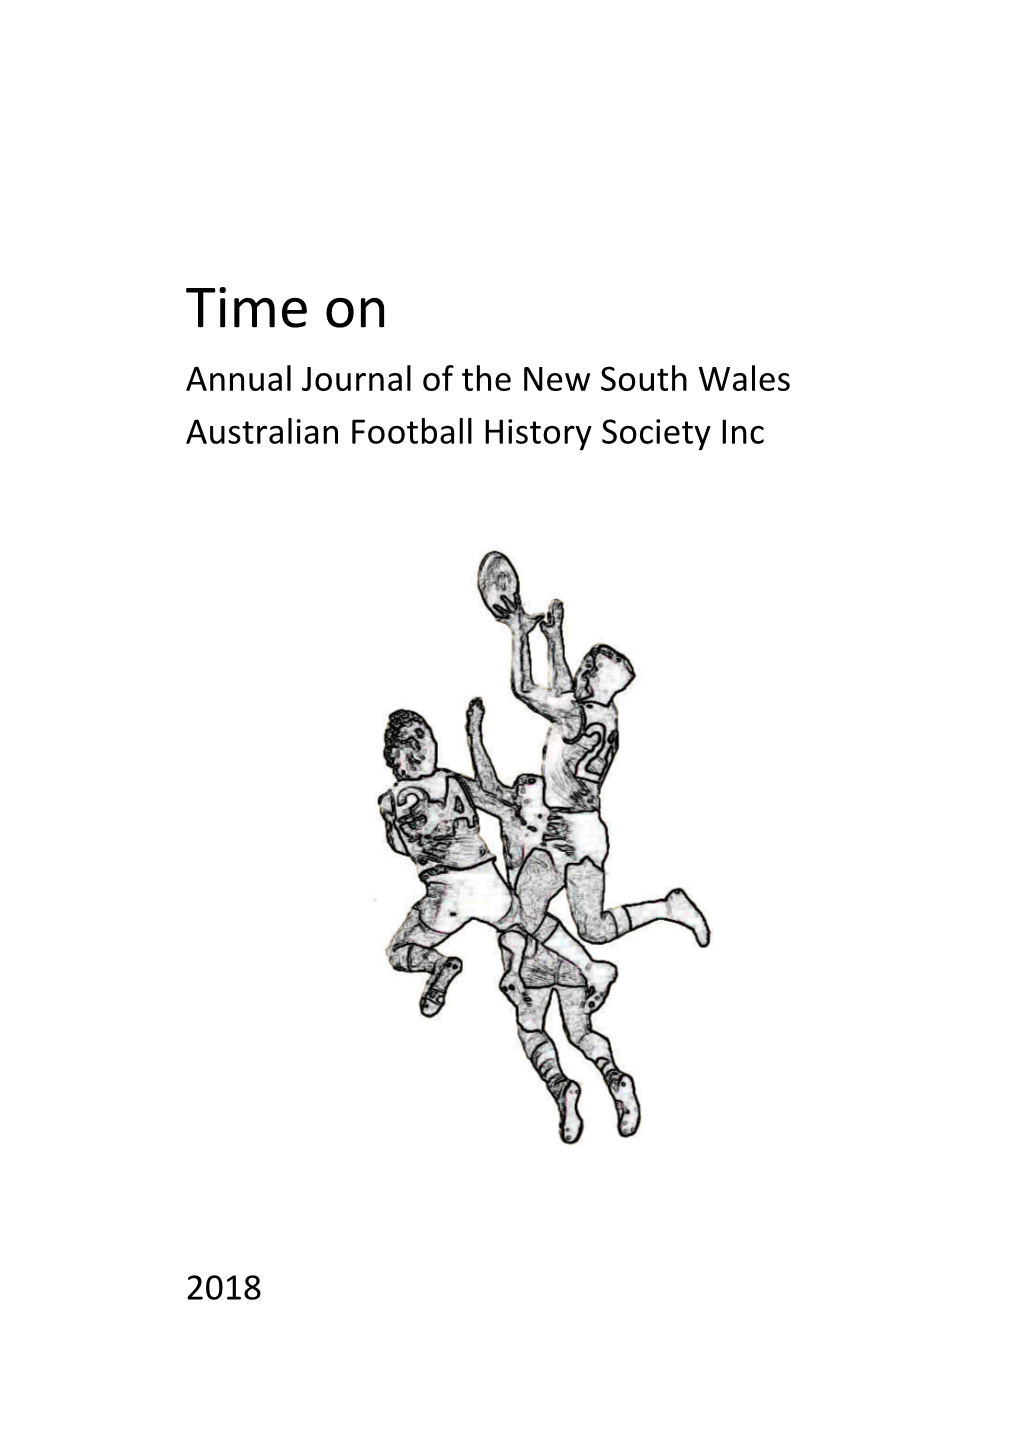 Time on Annual Journal of the New South Wales Australian Football History Society Inc